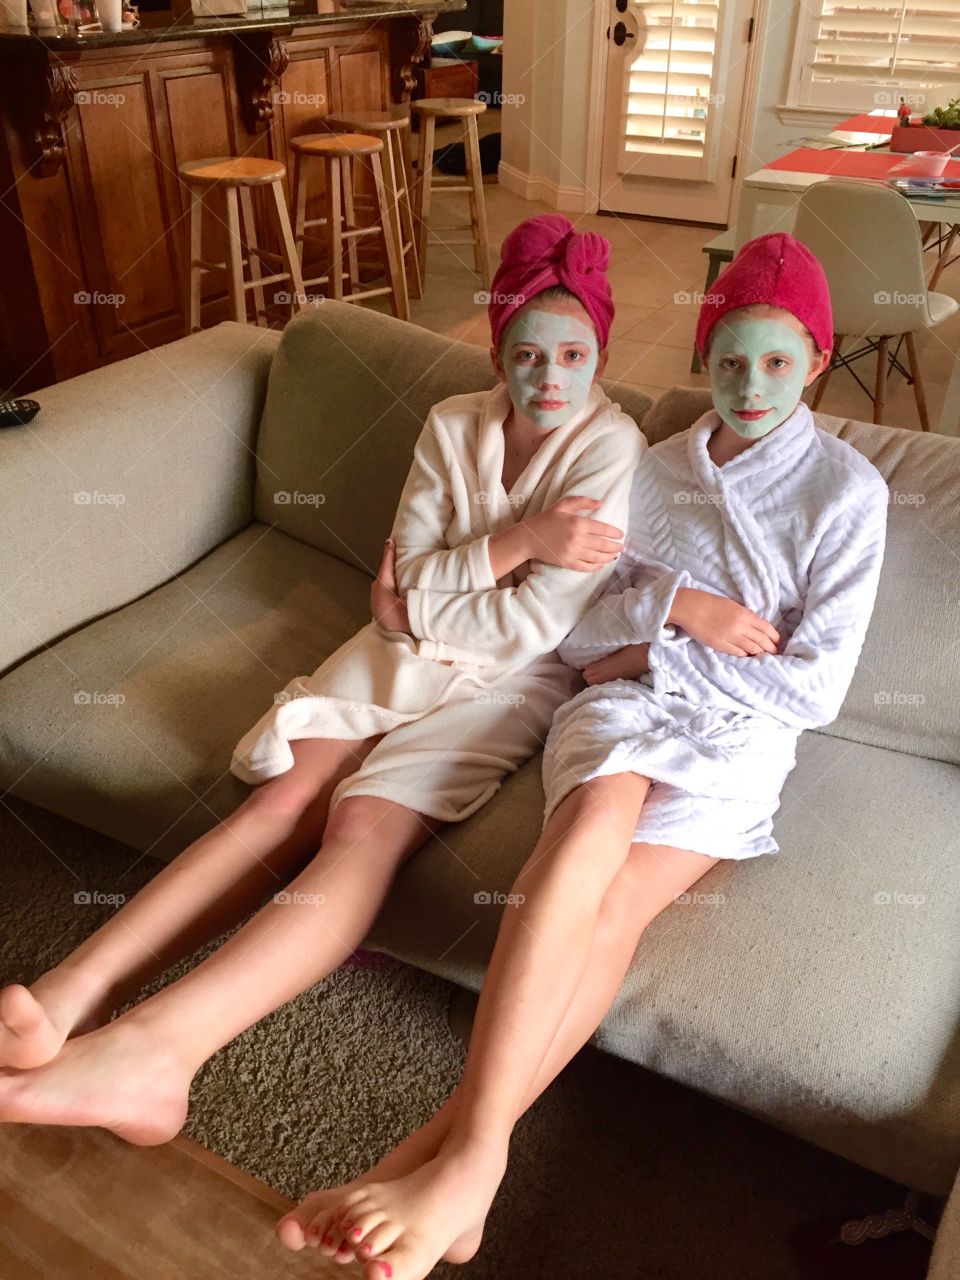 Spa day. Two girls in robes and facial masks sit next to each other on a couch.